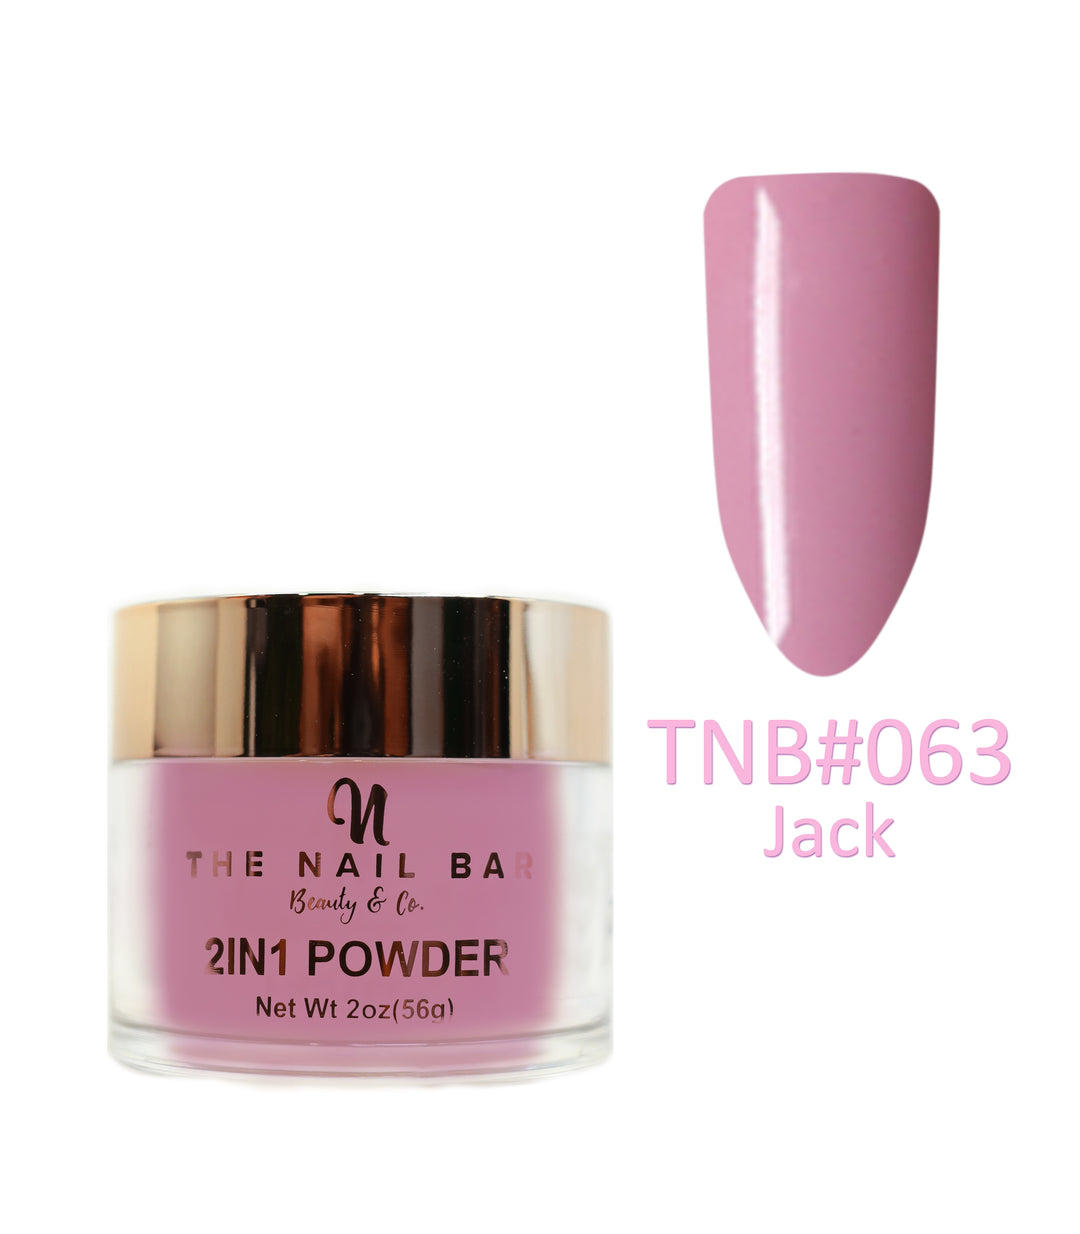 2-In-1 Dipping/Acrylic colour powder (2oz) -Jack - The Nail Bar Beauty & Co.